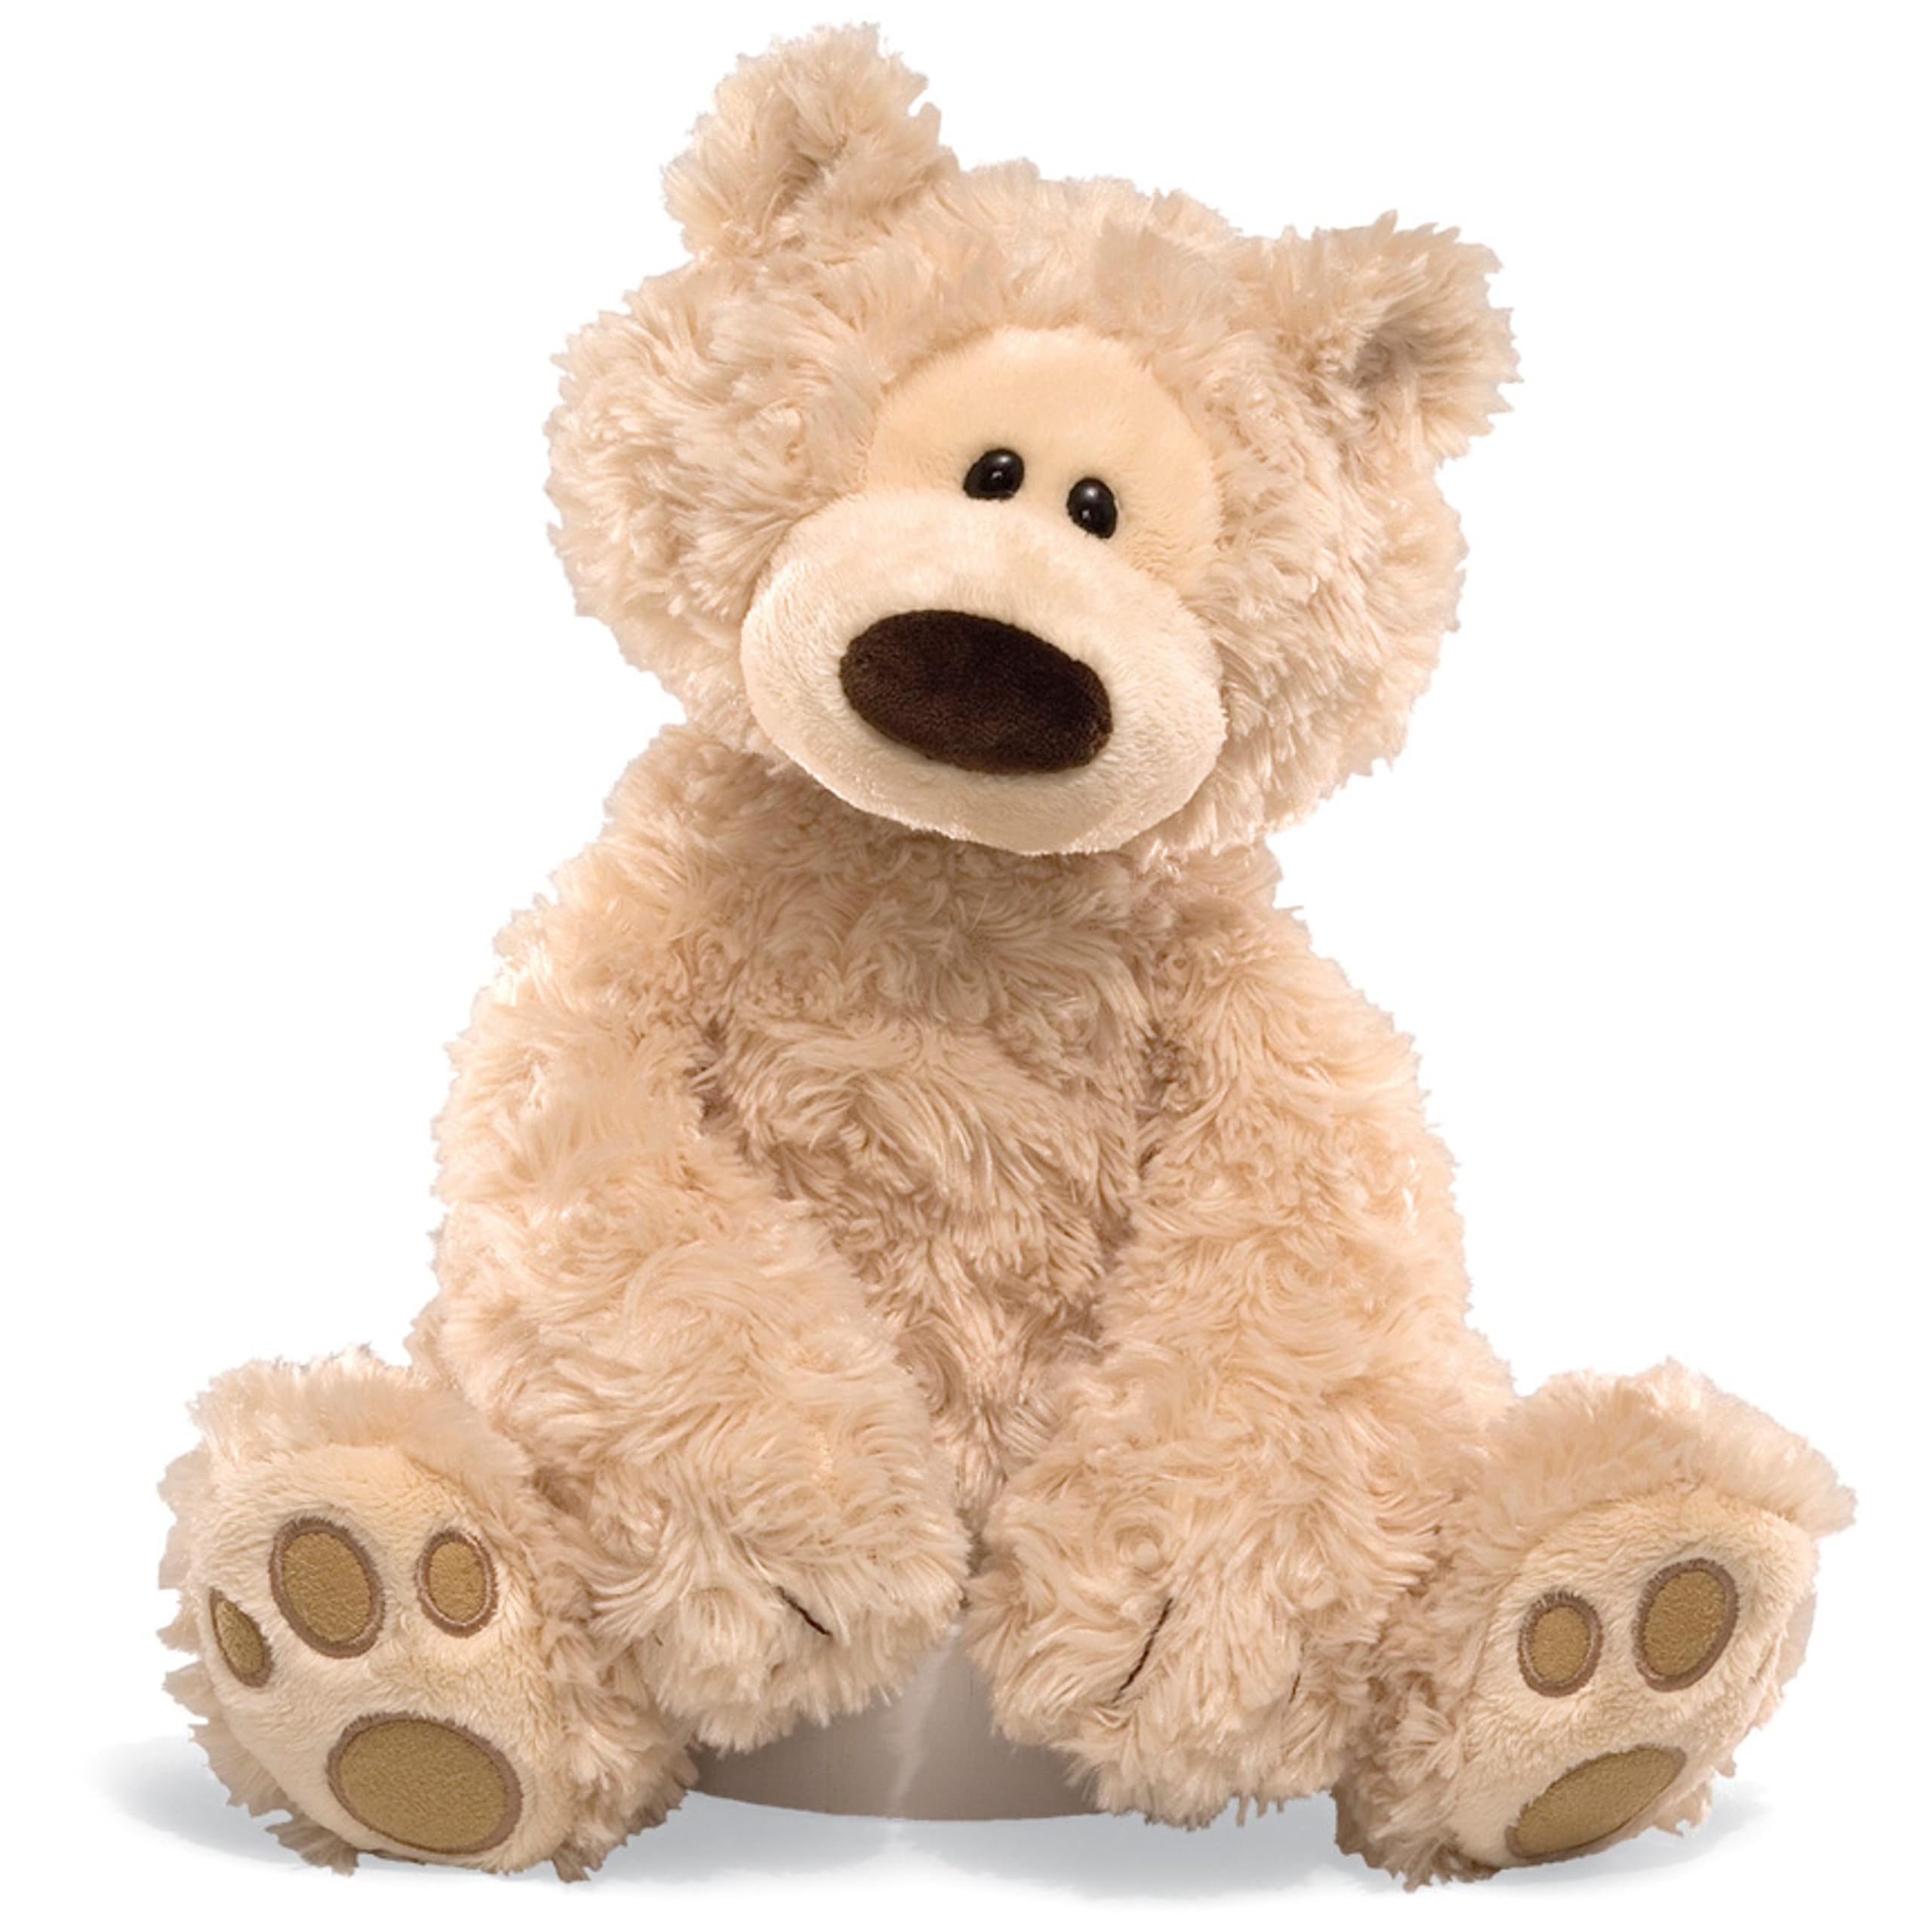 GUND Philbin Classic Teddy Bear, Premium Stuffed Animal for Ages 1 and Up, Beige, 12”